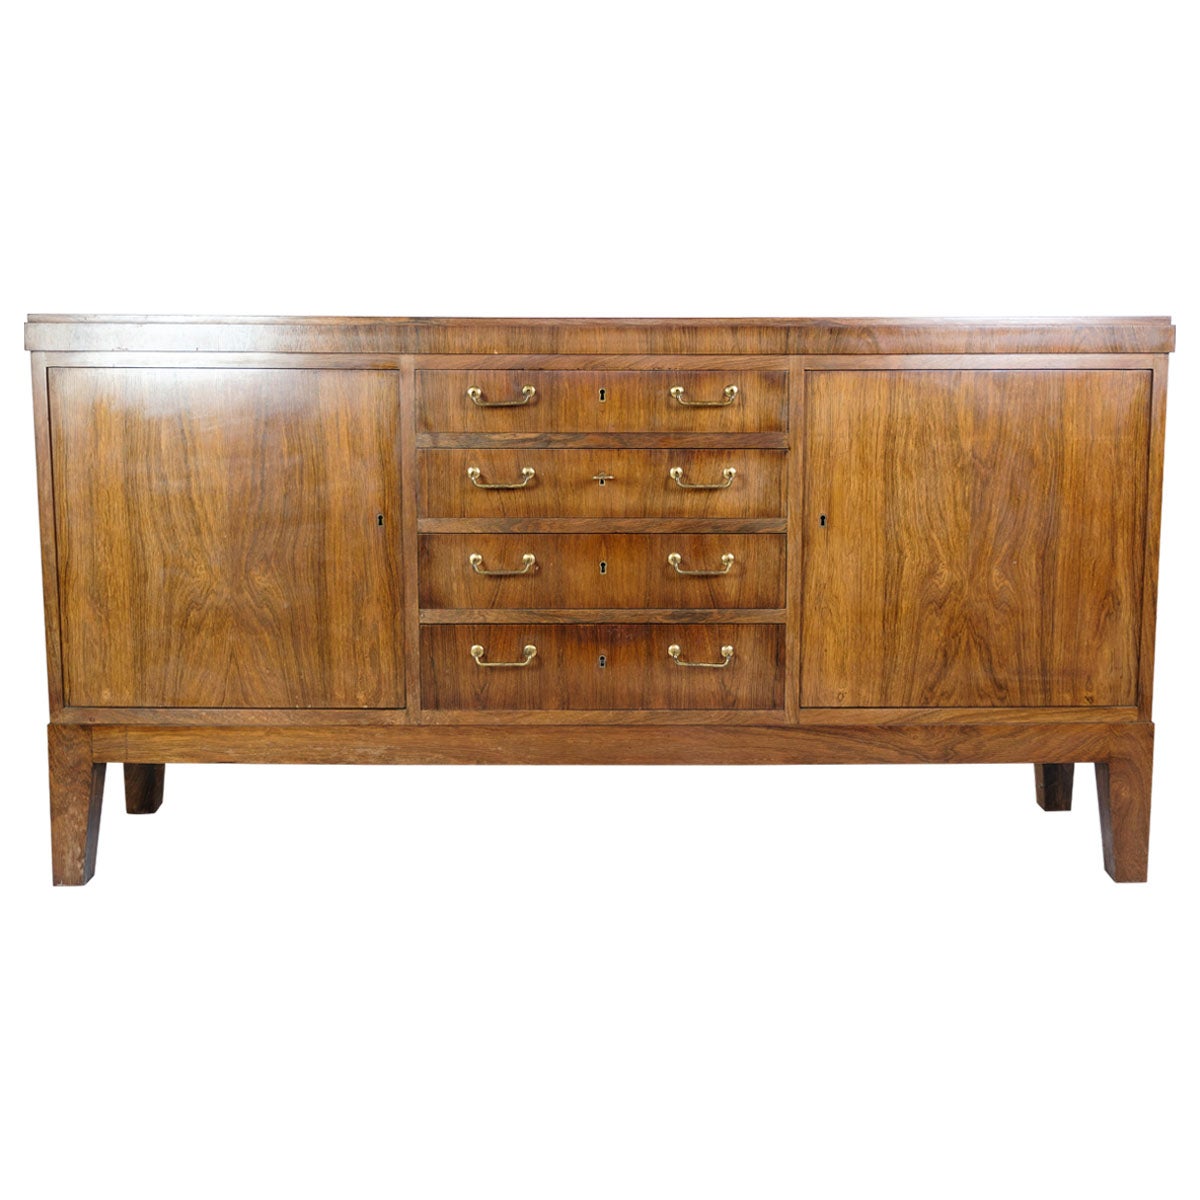 Low Sideboard in Rosewood with Brass Handles of Danish Carpenter From 1950s